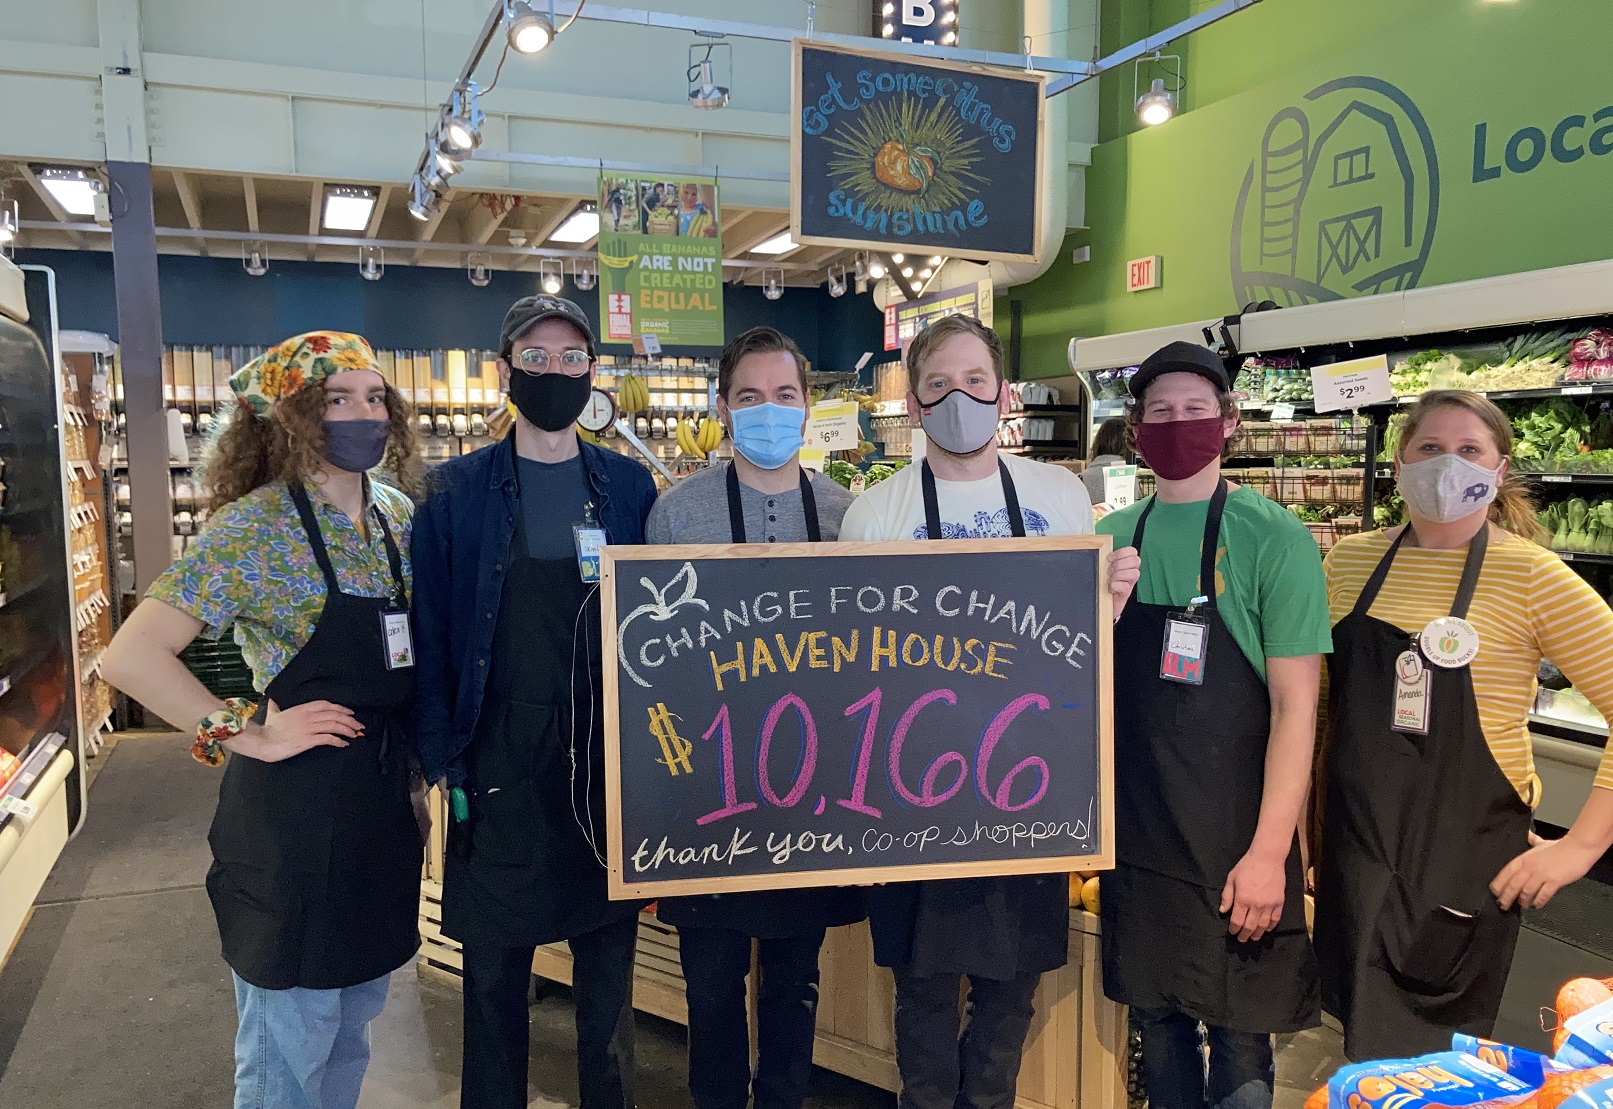 Six workers stand in a grocery store holding a blackboard with "$10,166" written on it in pink